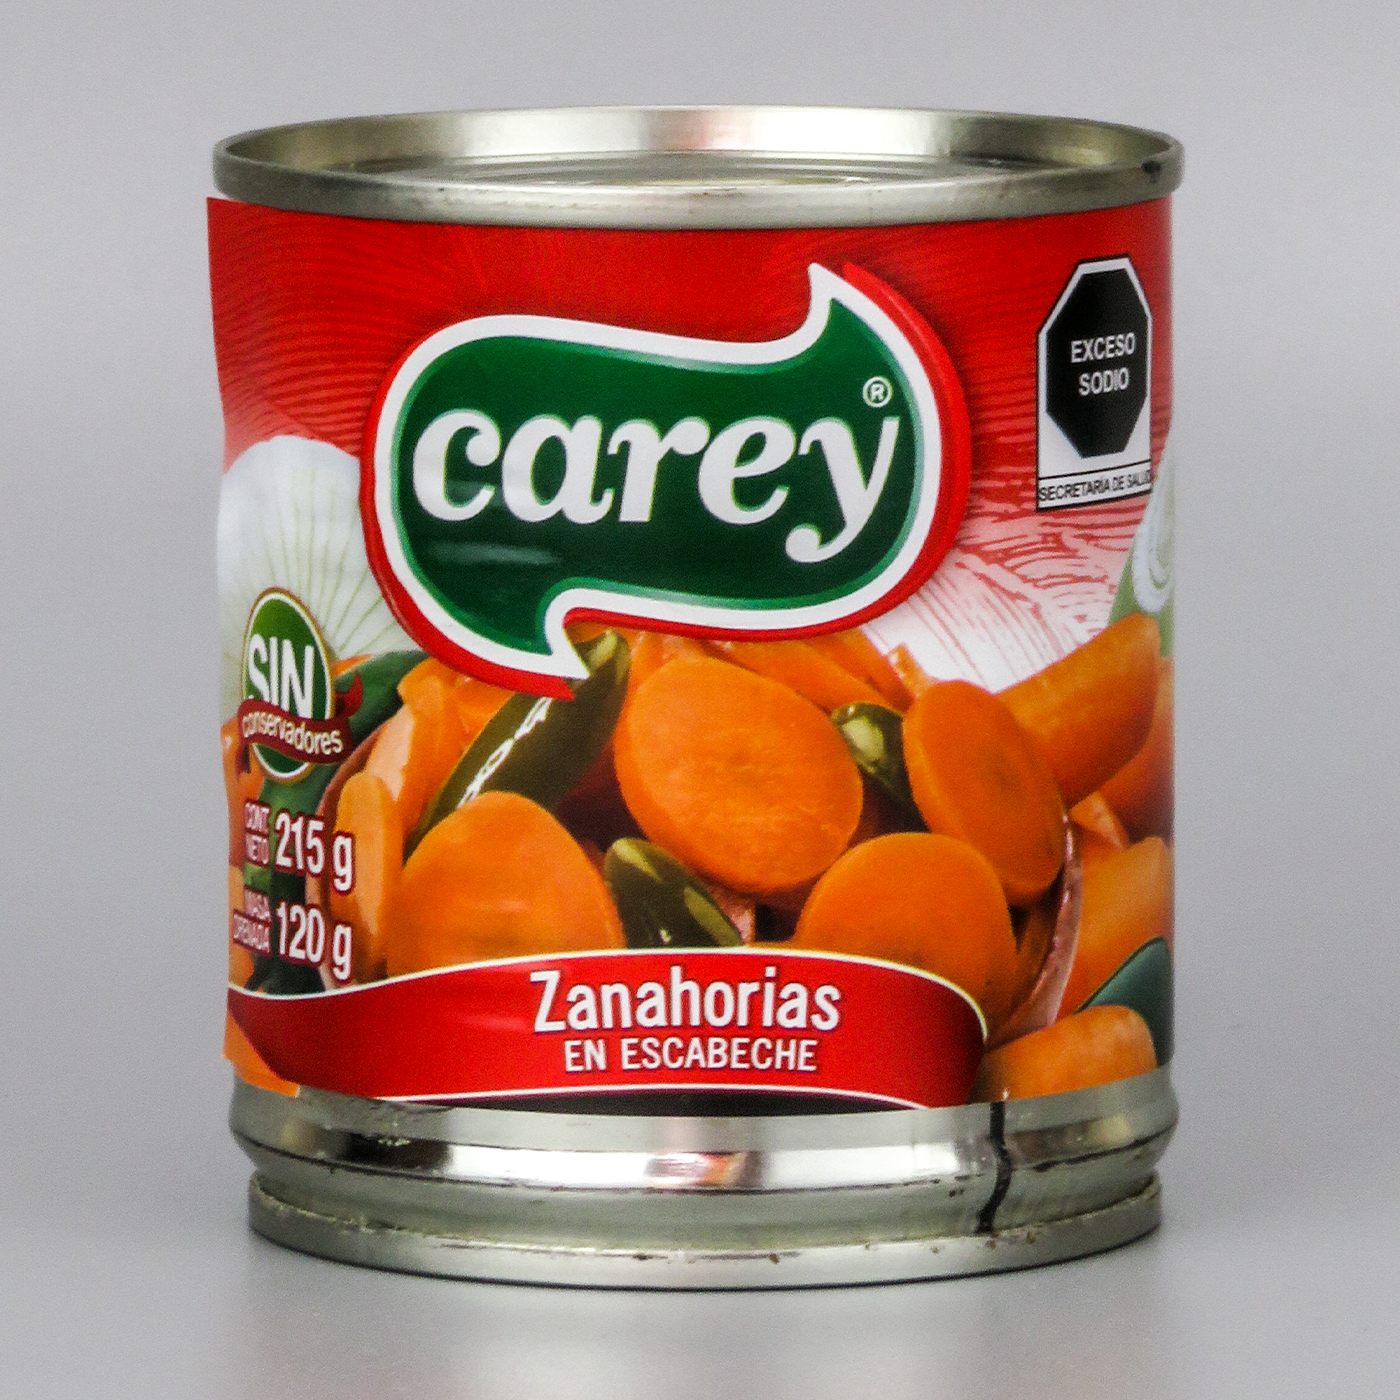 pickled carrots - product image